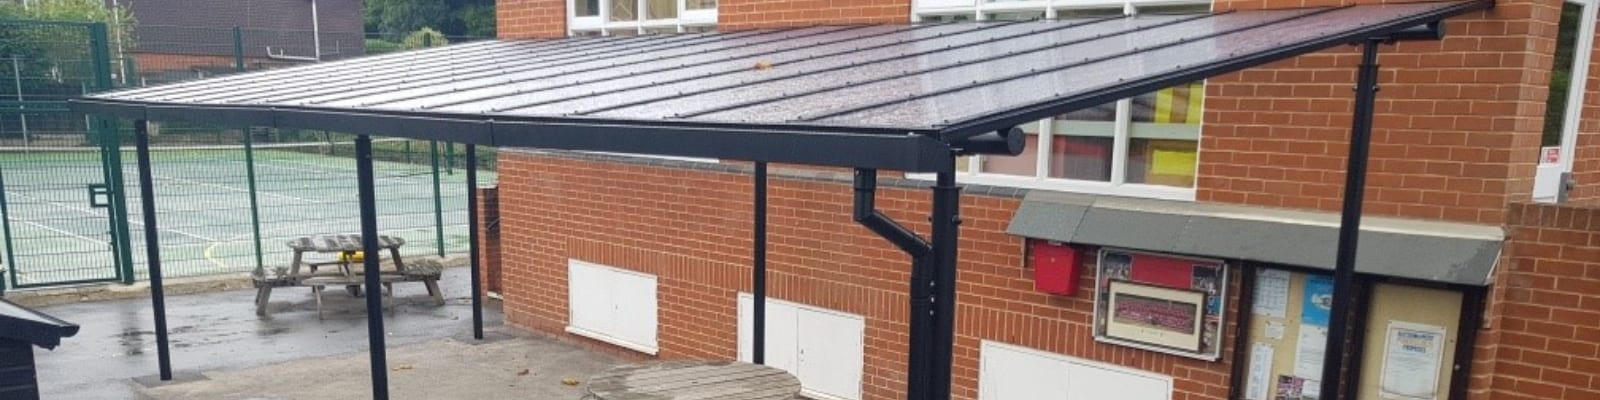 St Hilda's Primary School Straight Roof Shelter